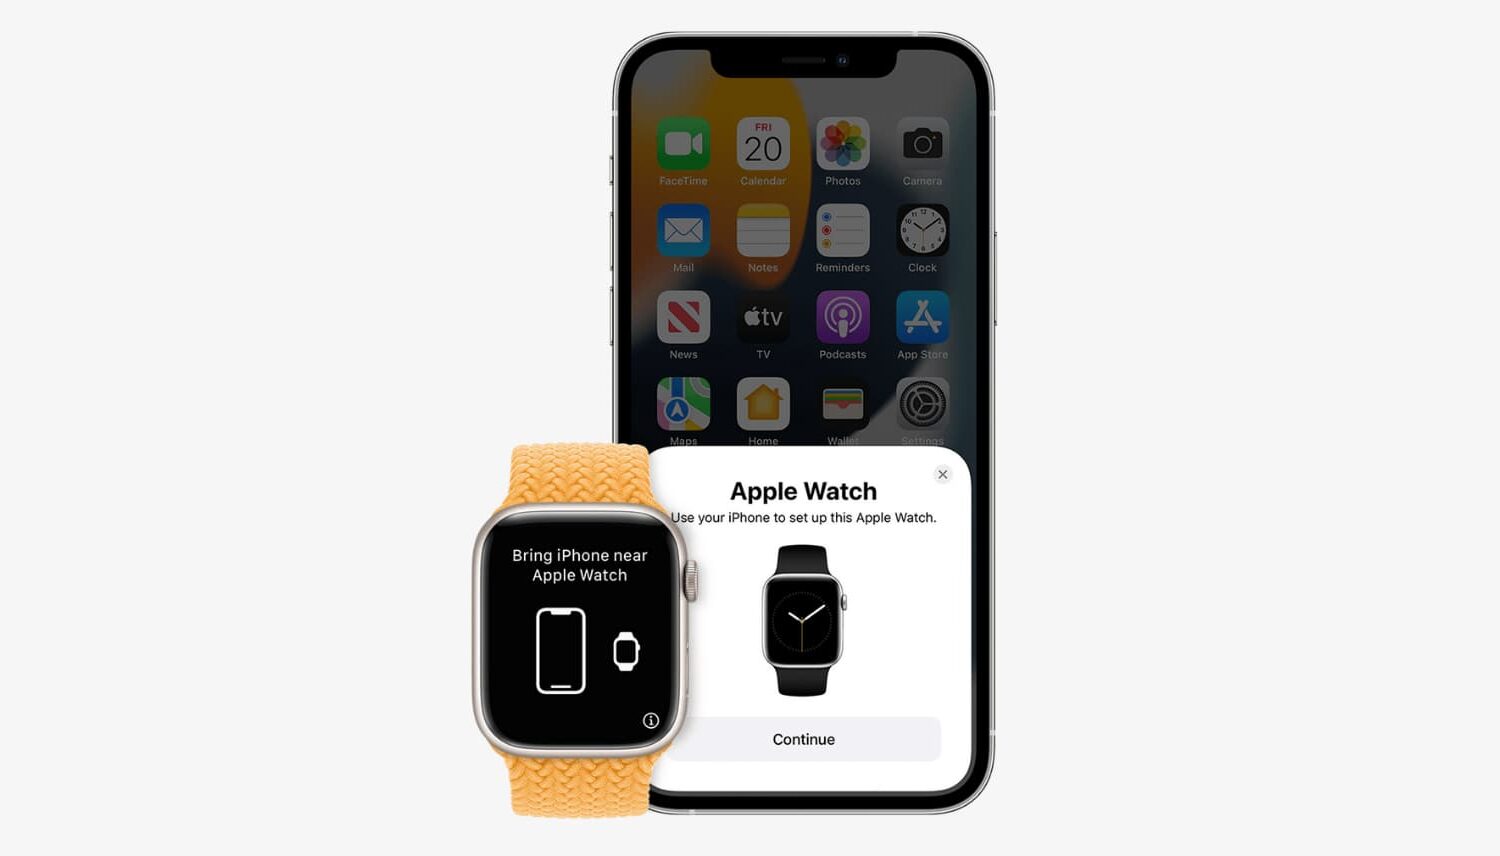 iPhone and Apple Watch on the Set up screen